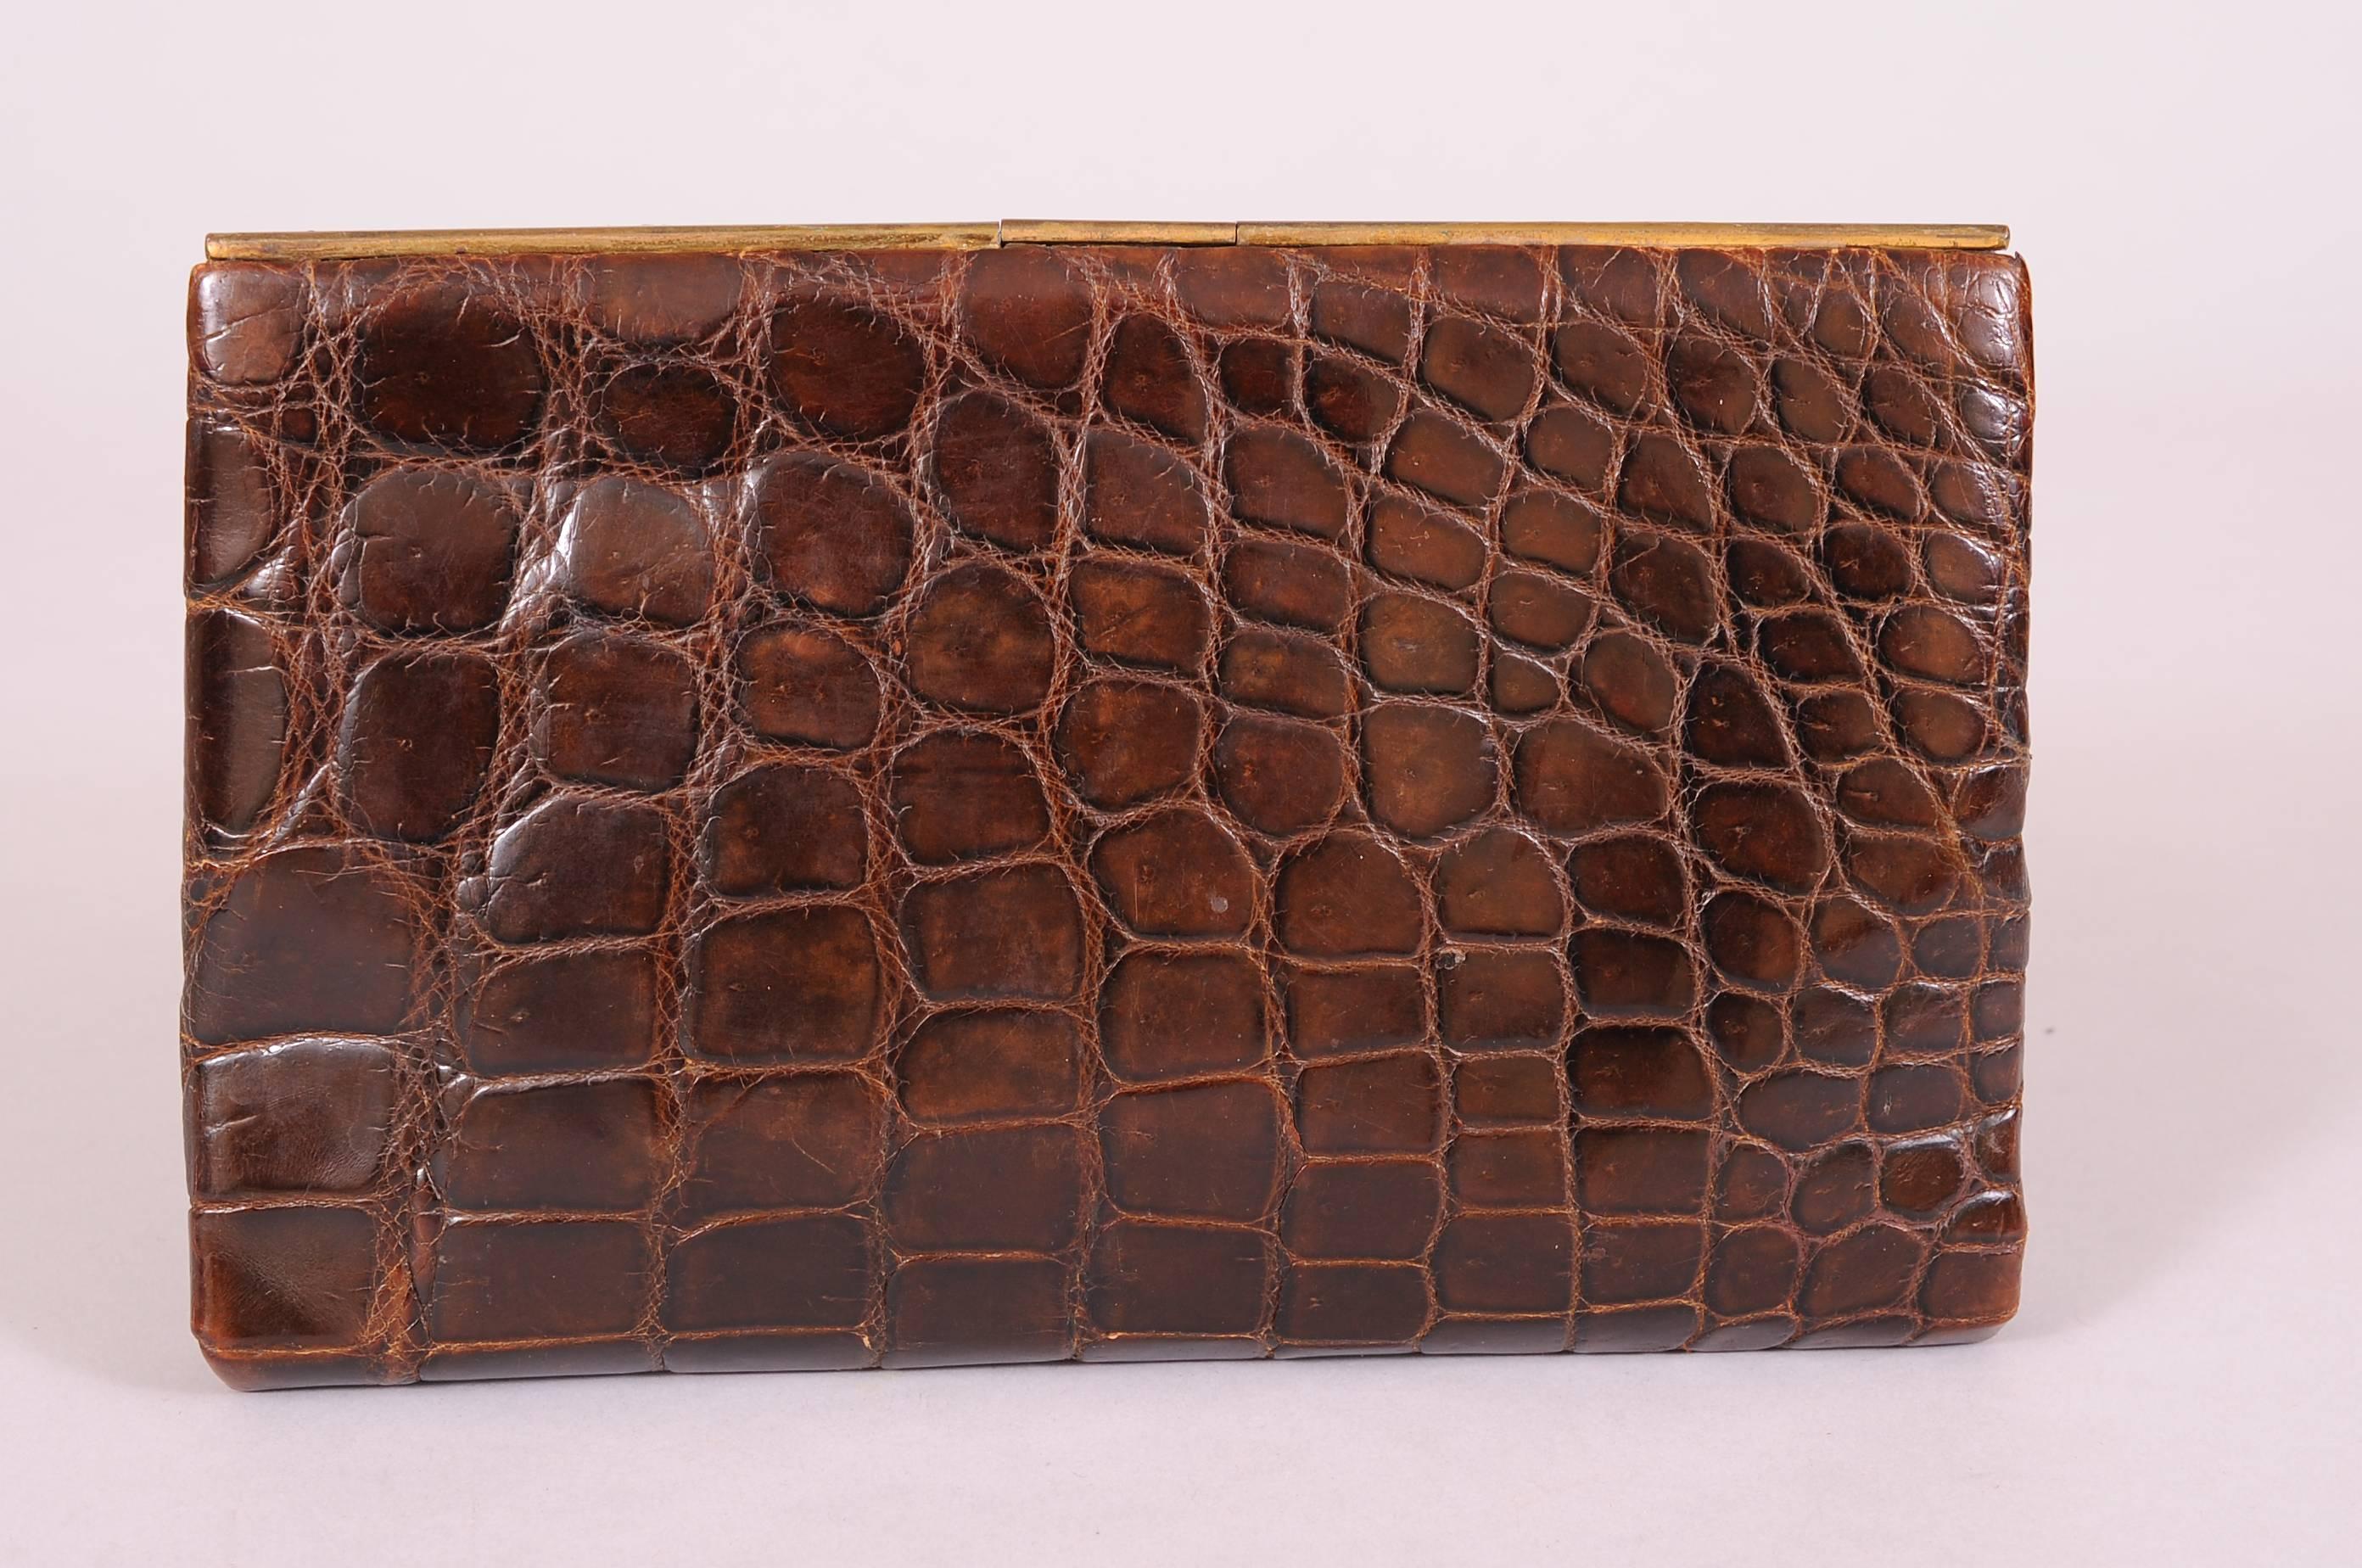 Retailed by Vickery, Regent St. London this 1930's crocodile clutch is spare and elegant. The brass frame barely rises above the crocodile skin. The small handle on the back is placed on the left side, adding an interesting design element. The bag